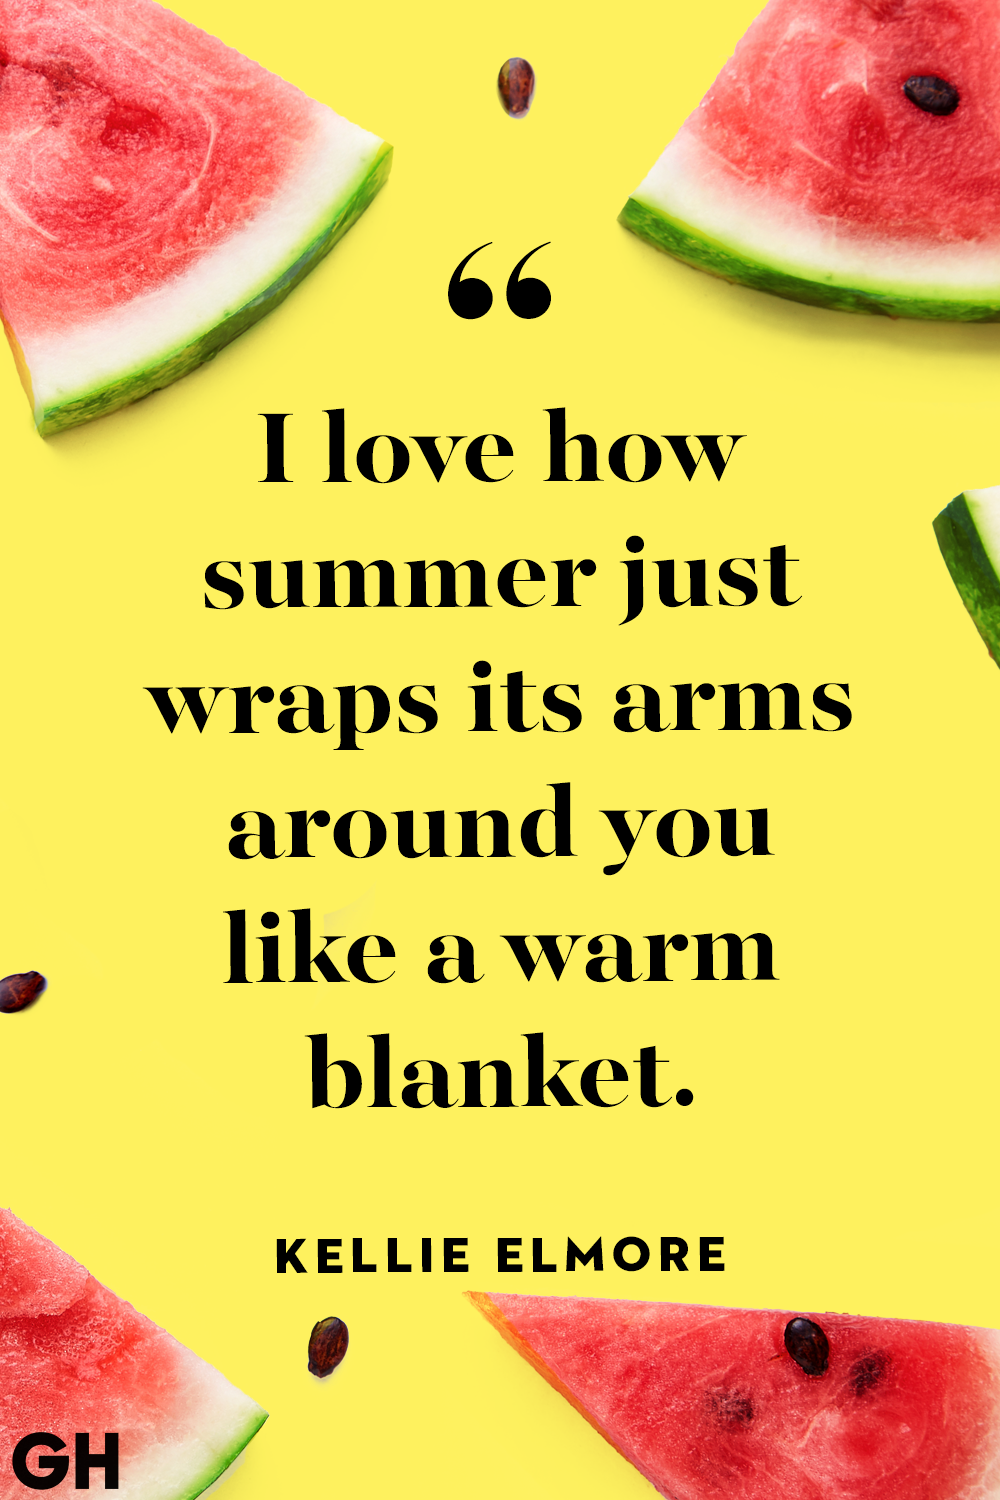 summer love quotes